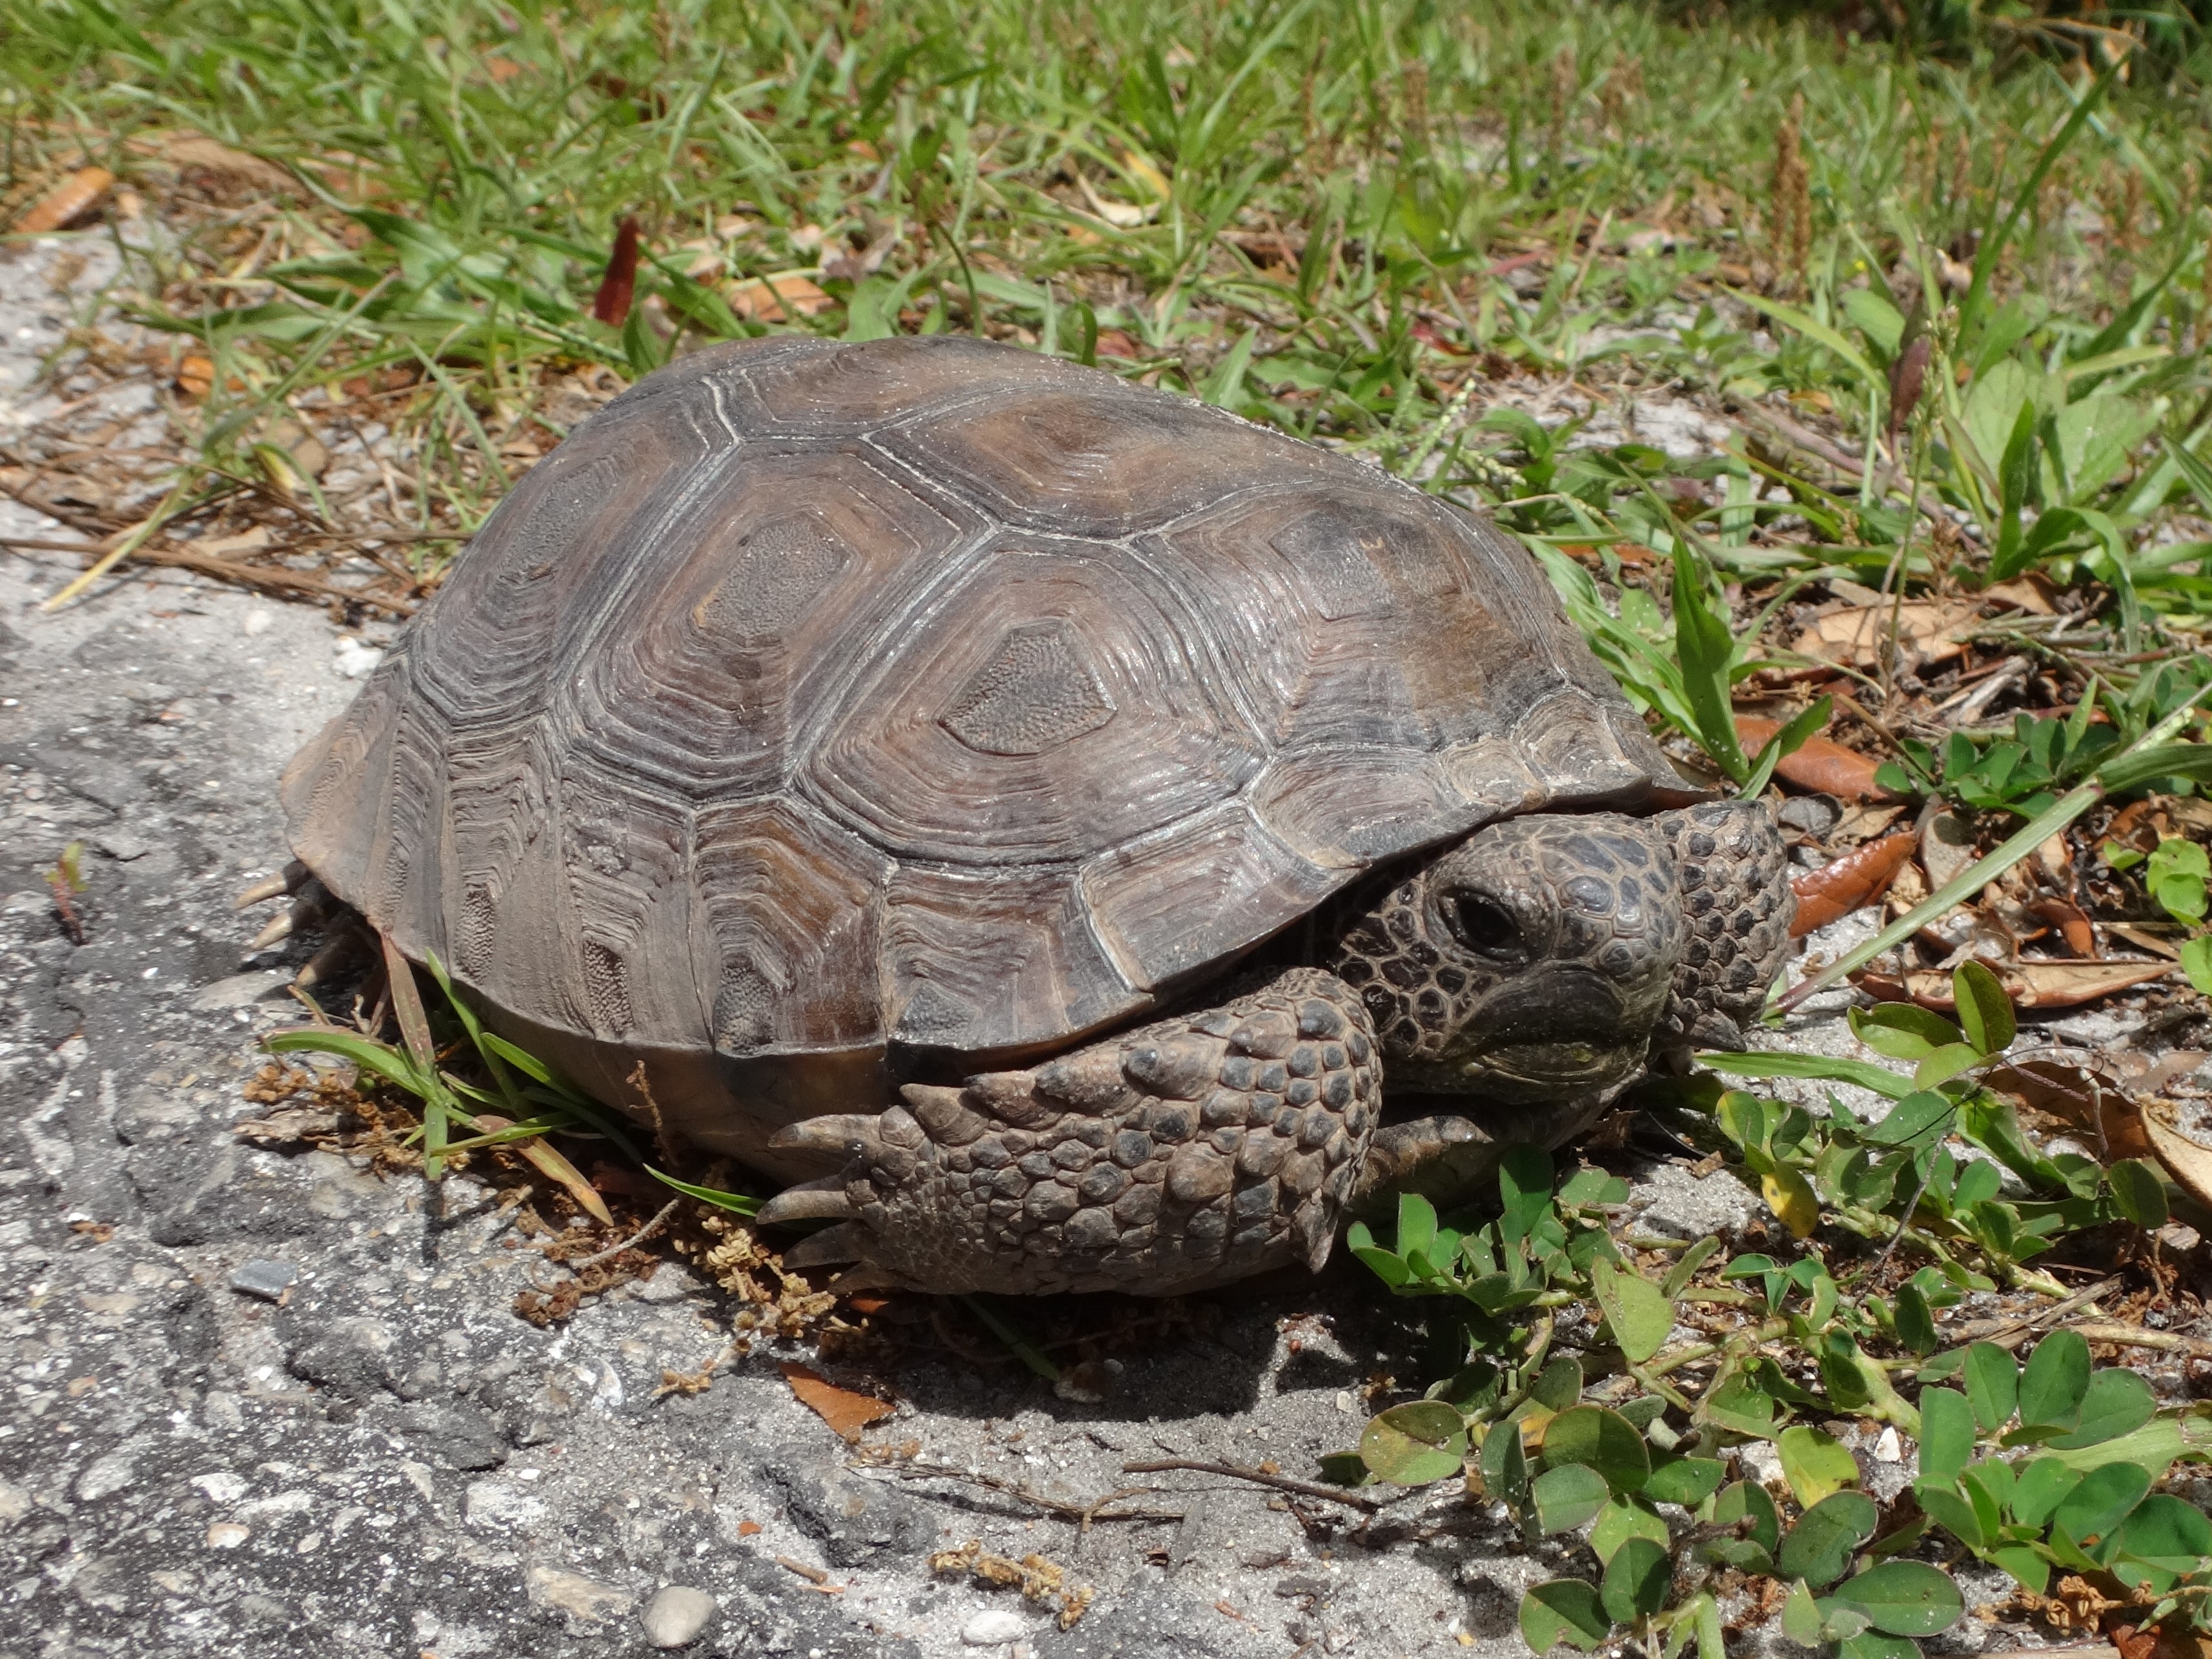 A gopher tortoise sits in the grass.